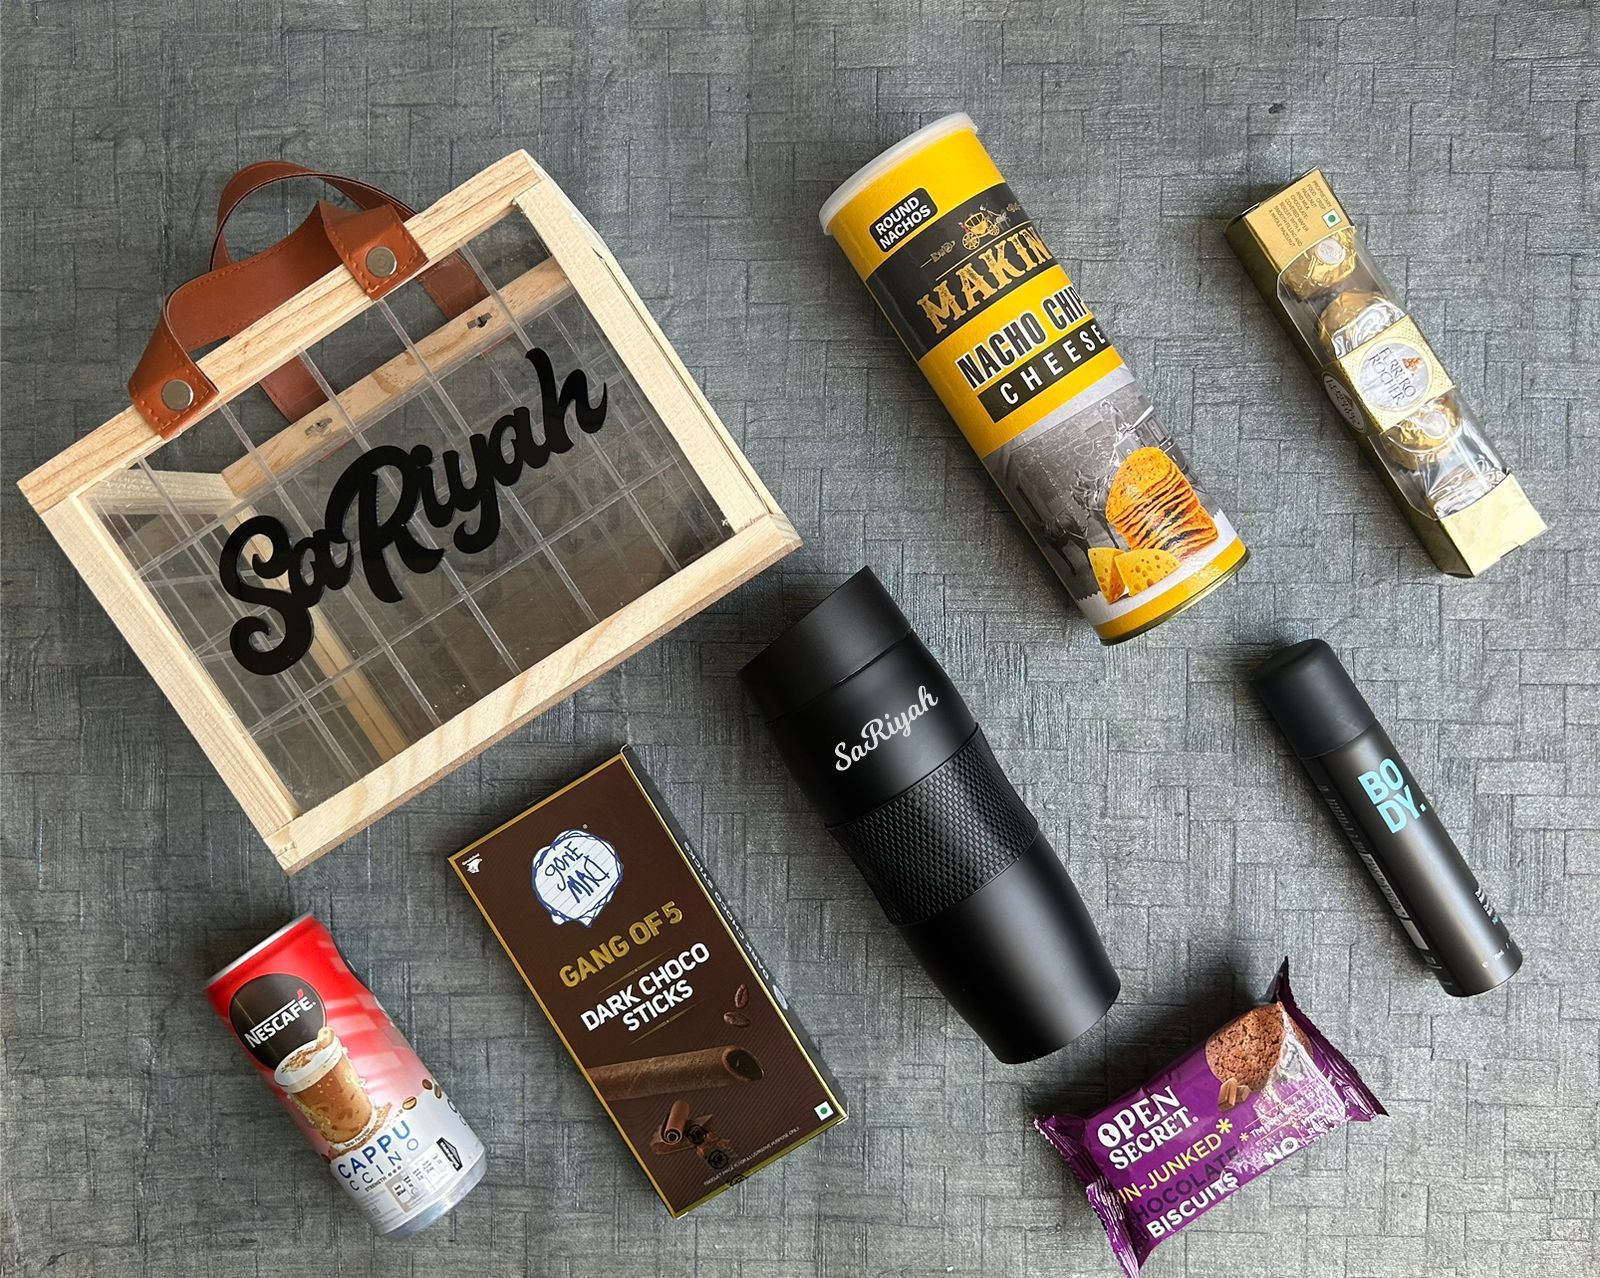 Personalised Gifts in NZ - Options and Alternatives - Chuffed Gifts